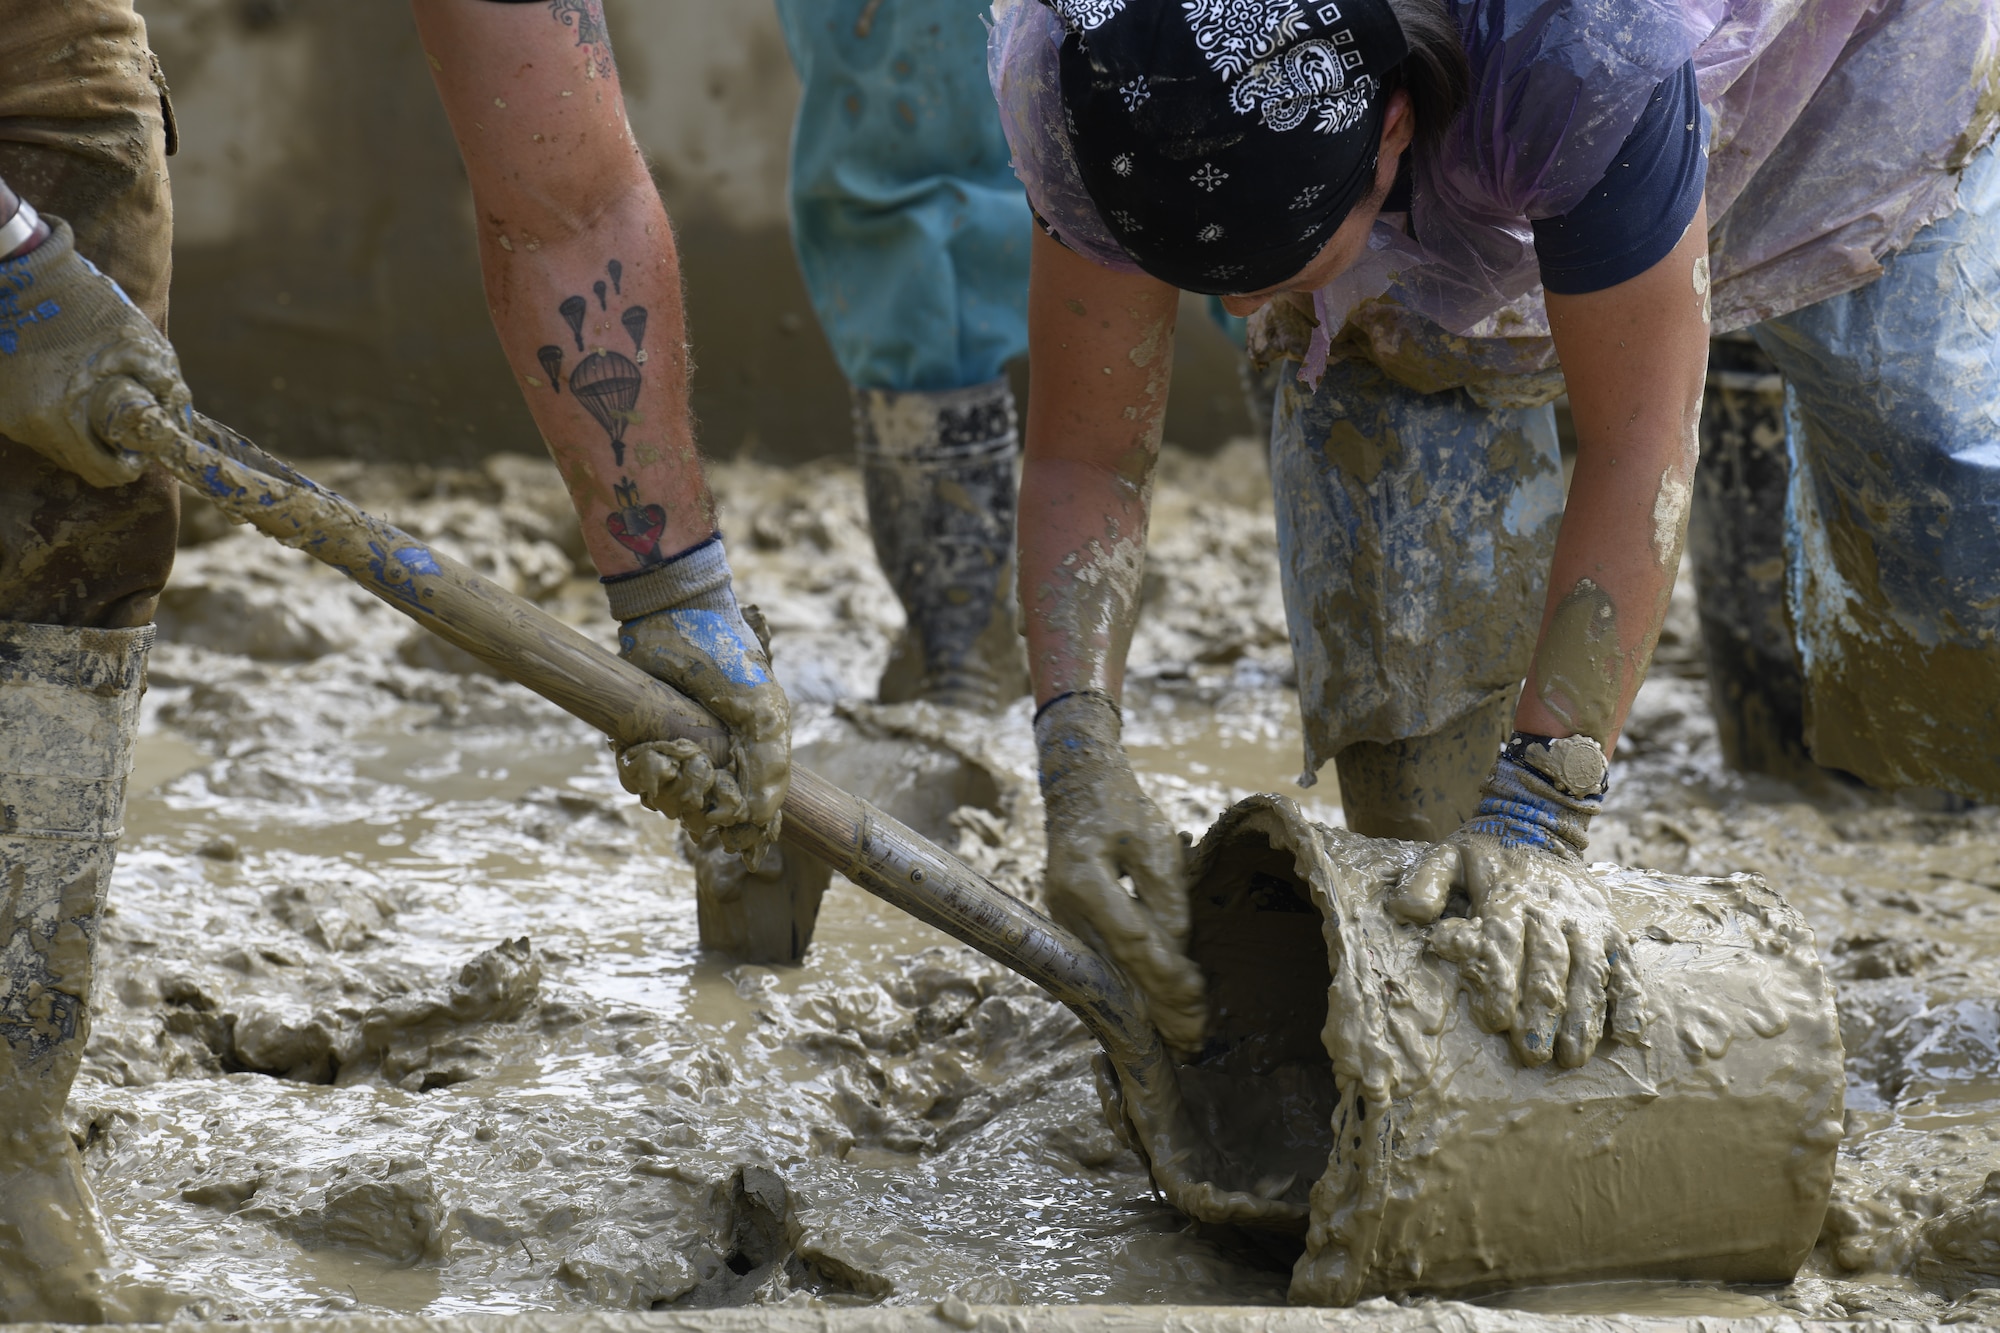 U.S. Air Force Tech. Sgt. Jack DeMato and Master Sgt. Myung McBride, recovery noncommissioned officers on a Defense POW/MIA Accounting Agency (DPAA) recovery team, shovel mud during operations in Nghe An province, Socialist Republic of Vietnam, Dec. 2, 2018.